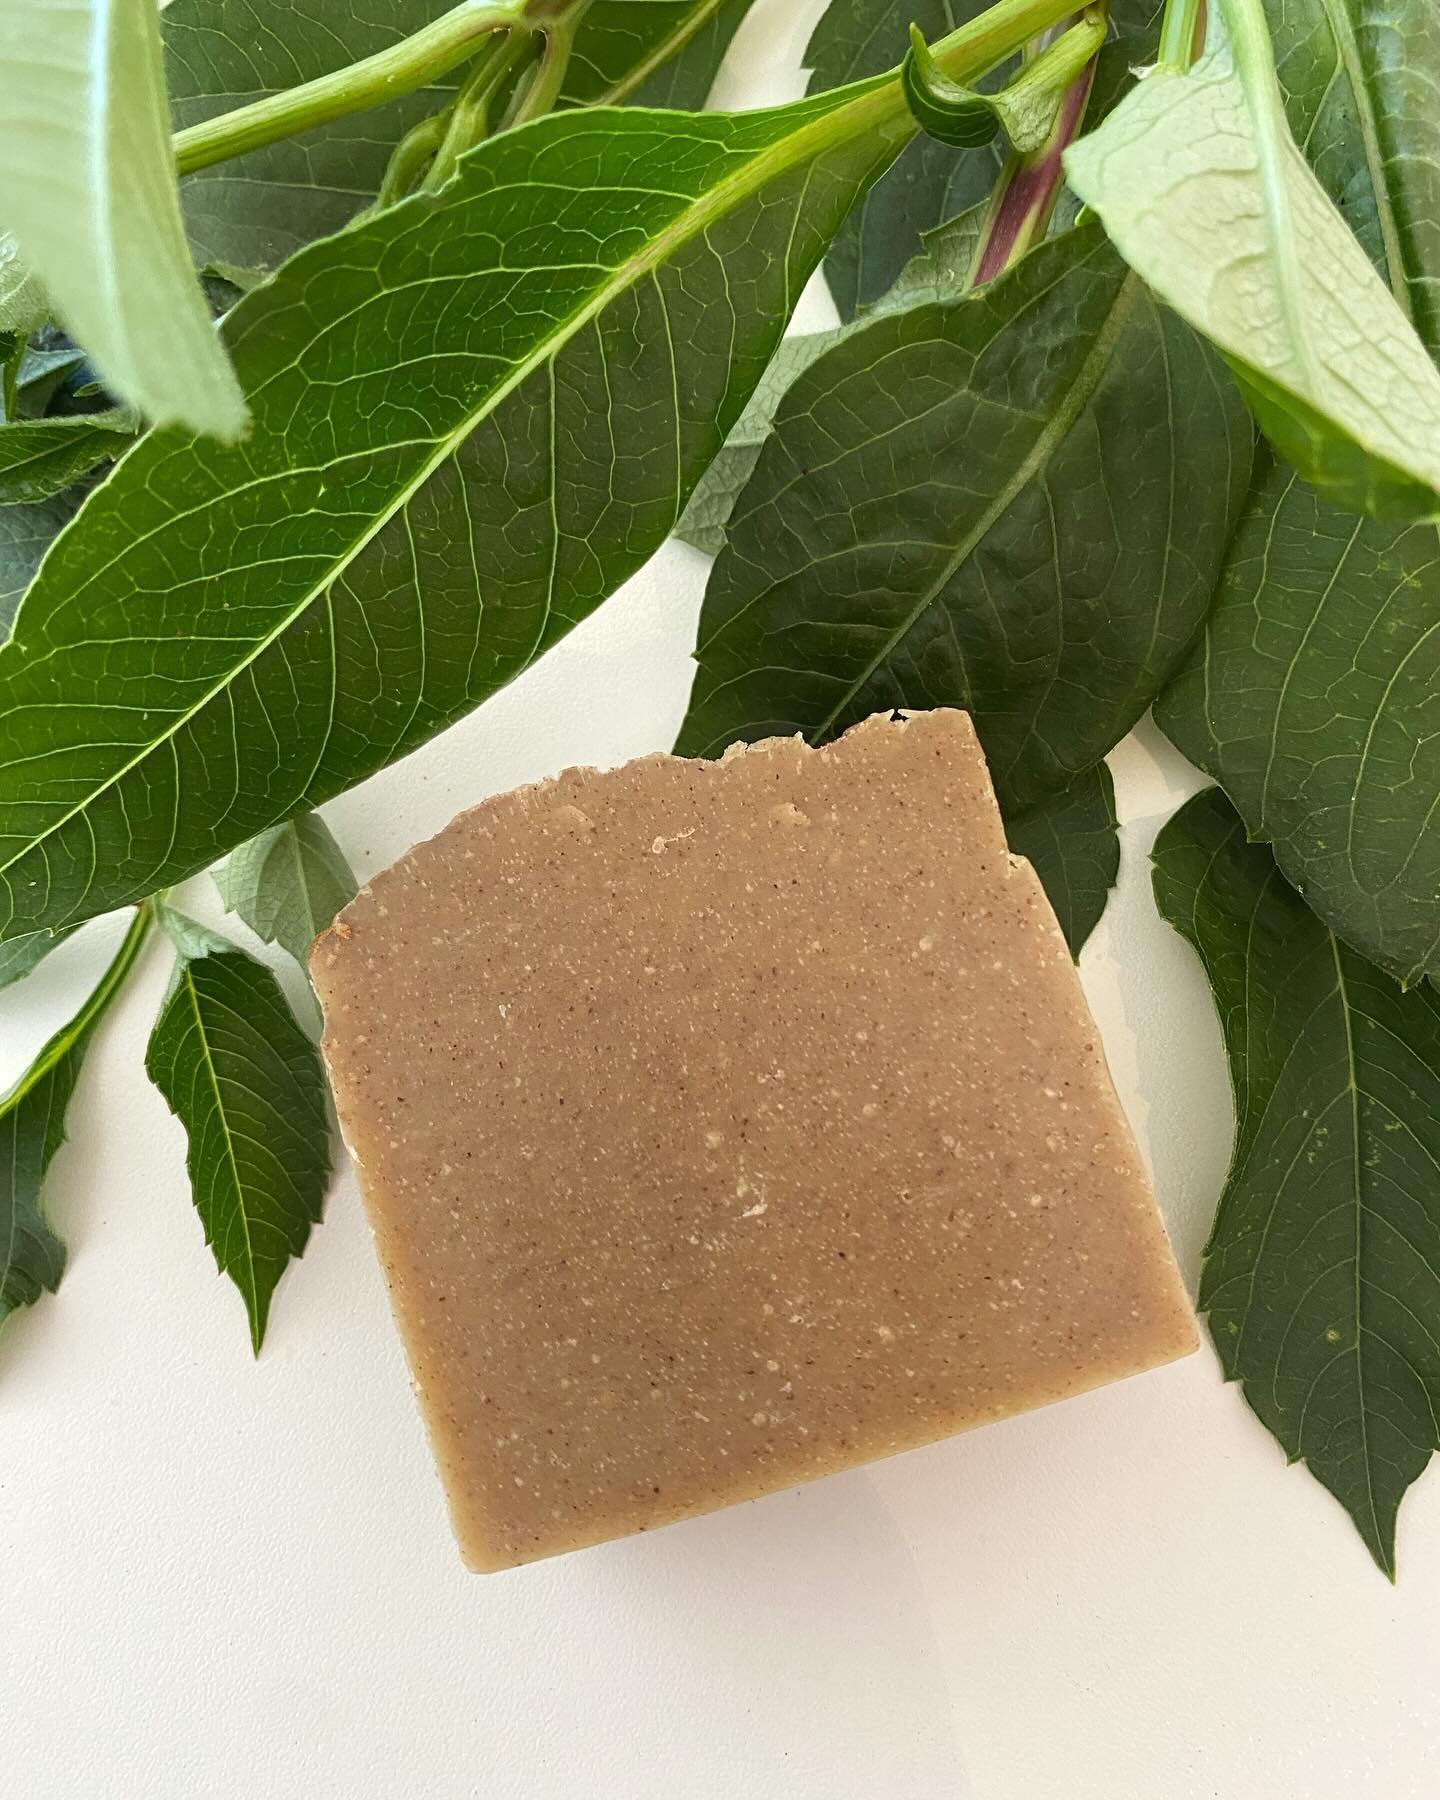 Honey, Cinnamon and Almond Meal Exfoliating Body Bar

A honey, almond and cinnamon scent mixed with olive oil, coconut oil, apricot kernel oil, and organic shea + cocoa butter makes this a lovely bar.

The almond meal gives it just the right texture 